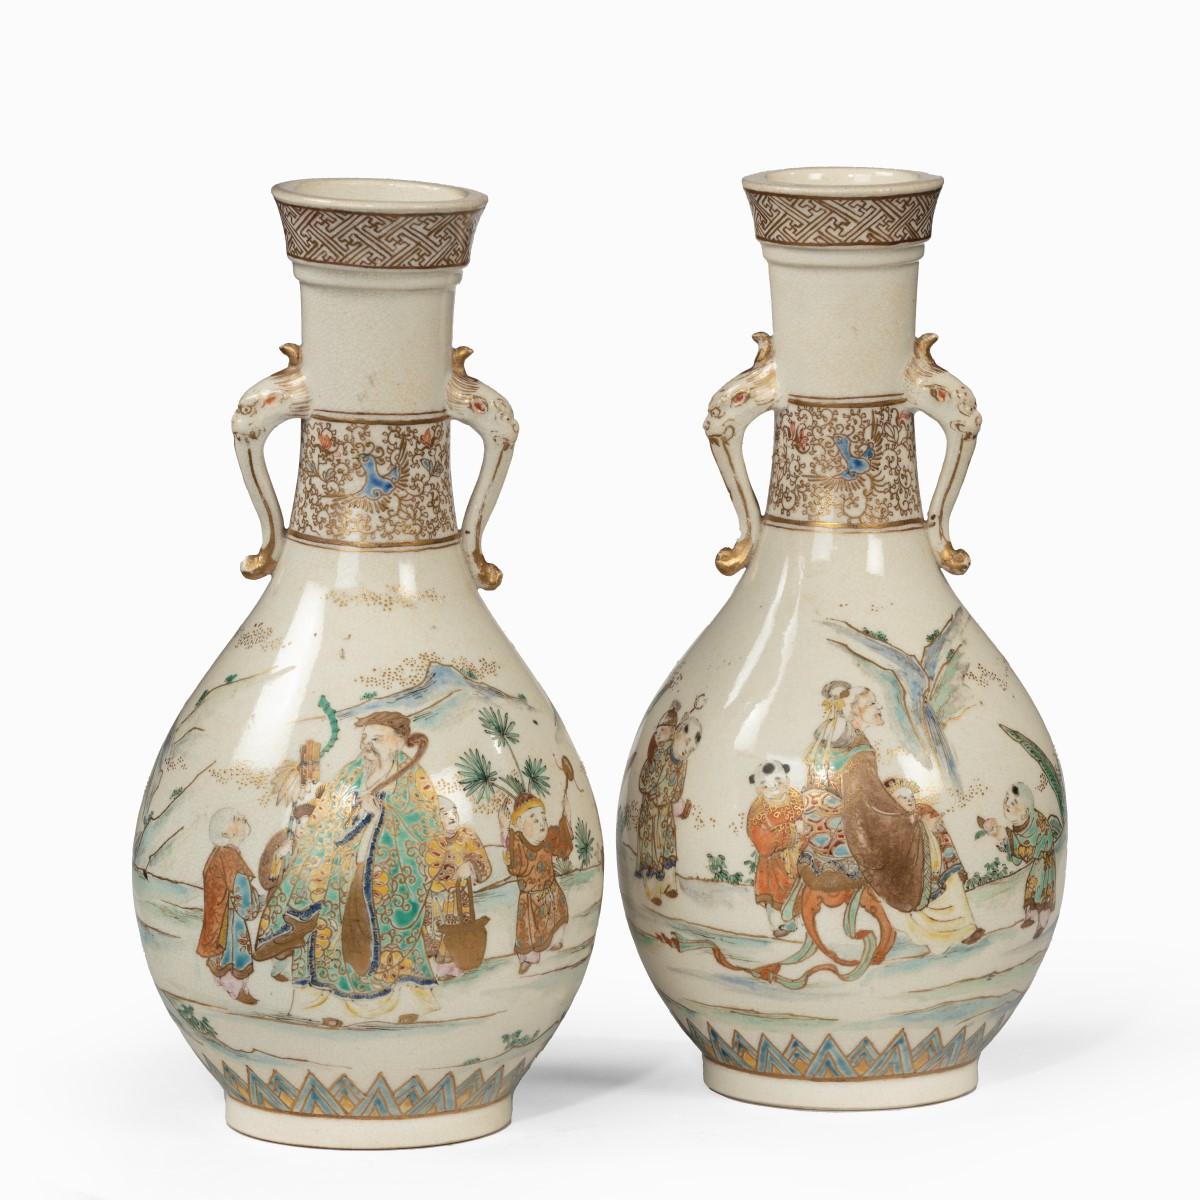 A pair of Meiji period Satsuma earthenware vases, each with applied elephant-mask handles, painted in overglaze pastel enamels and gilt with a continuous central frieze of sages and children in a mountainous landscape, with a border of scrolling